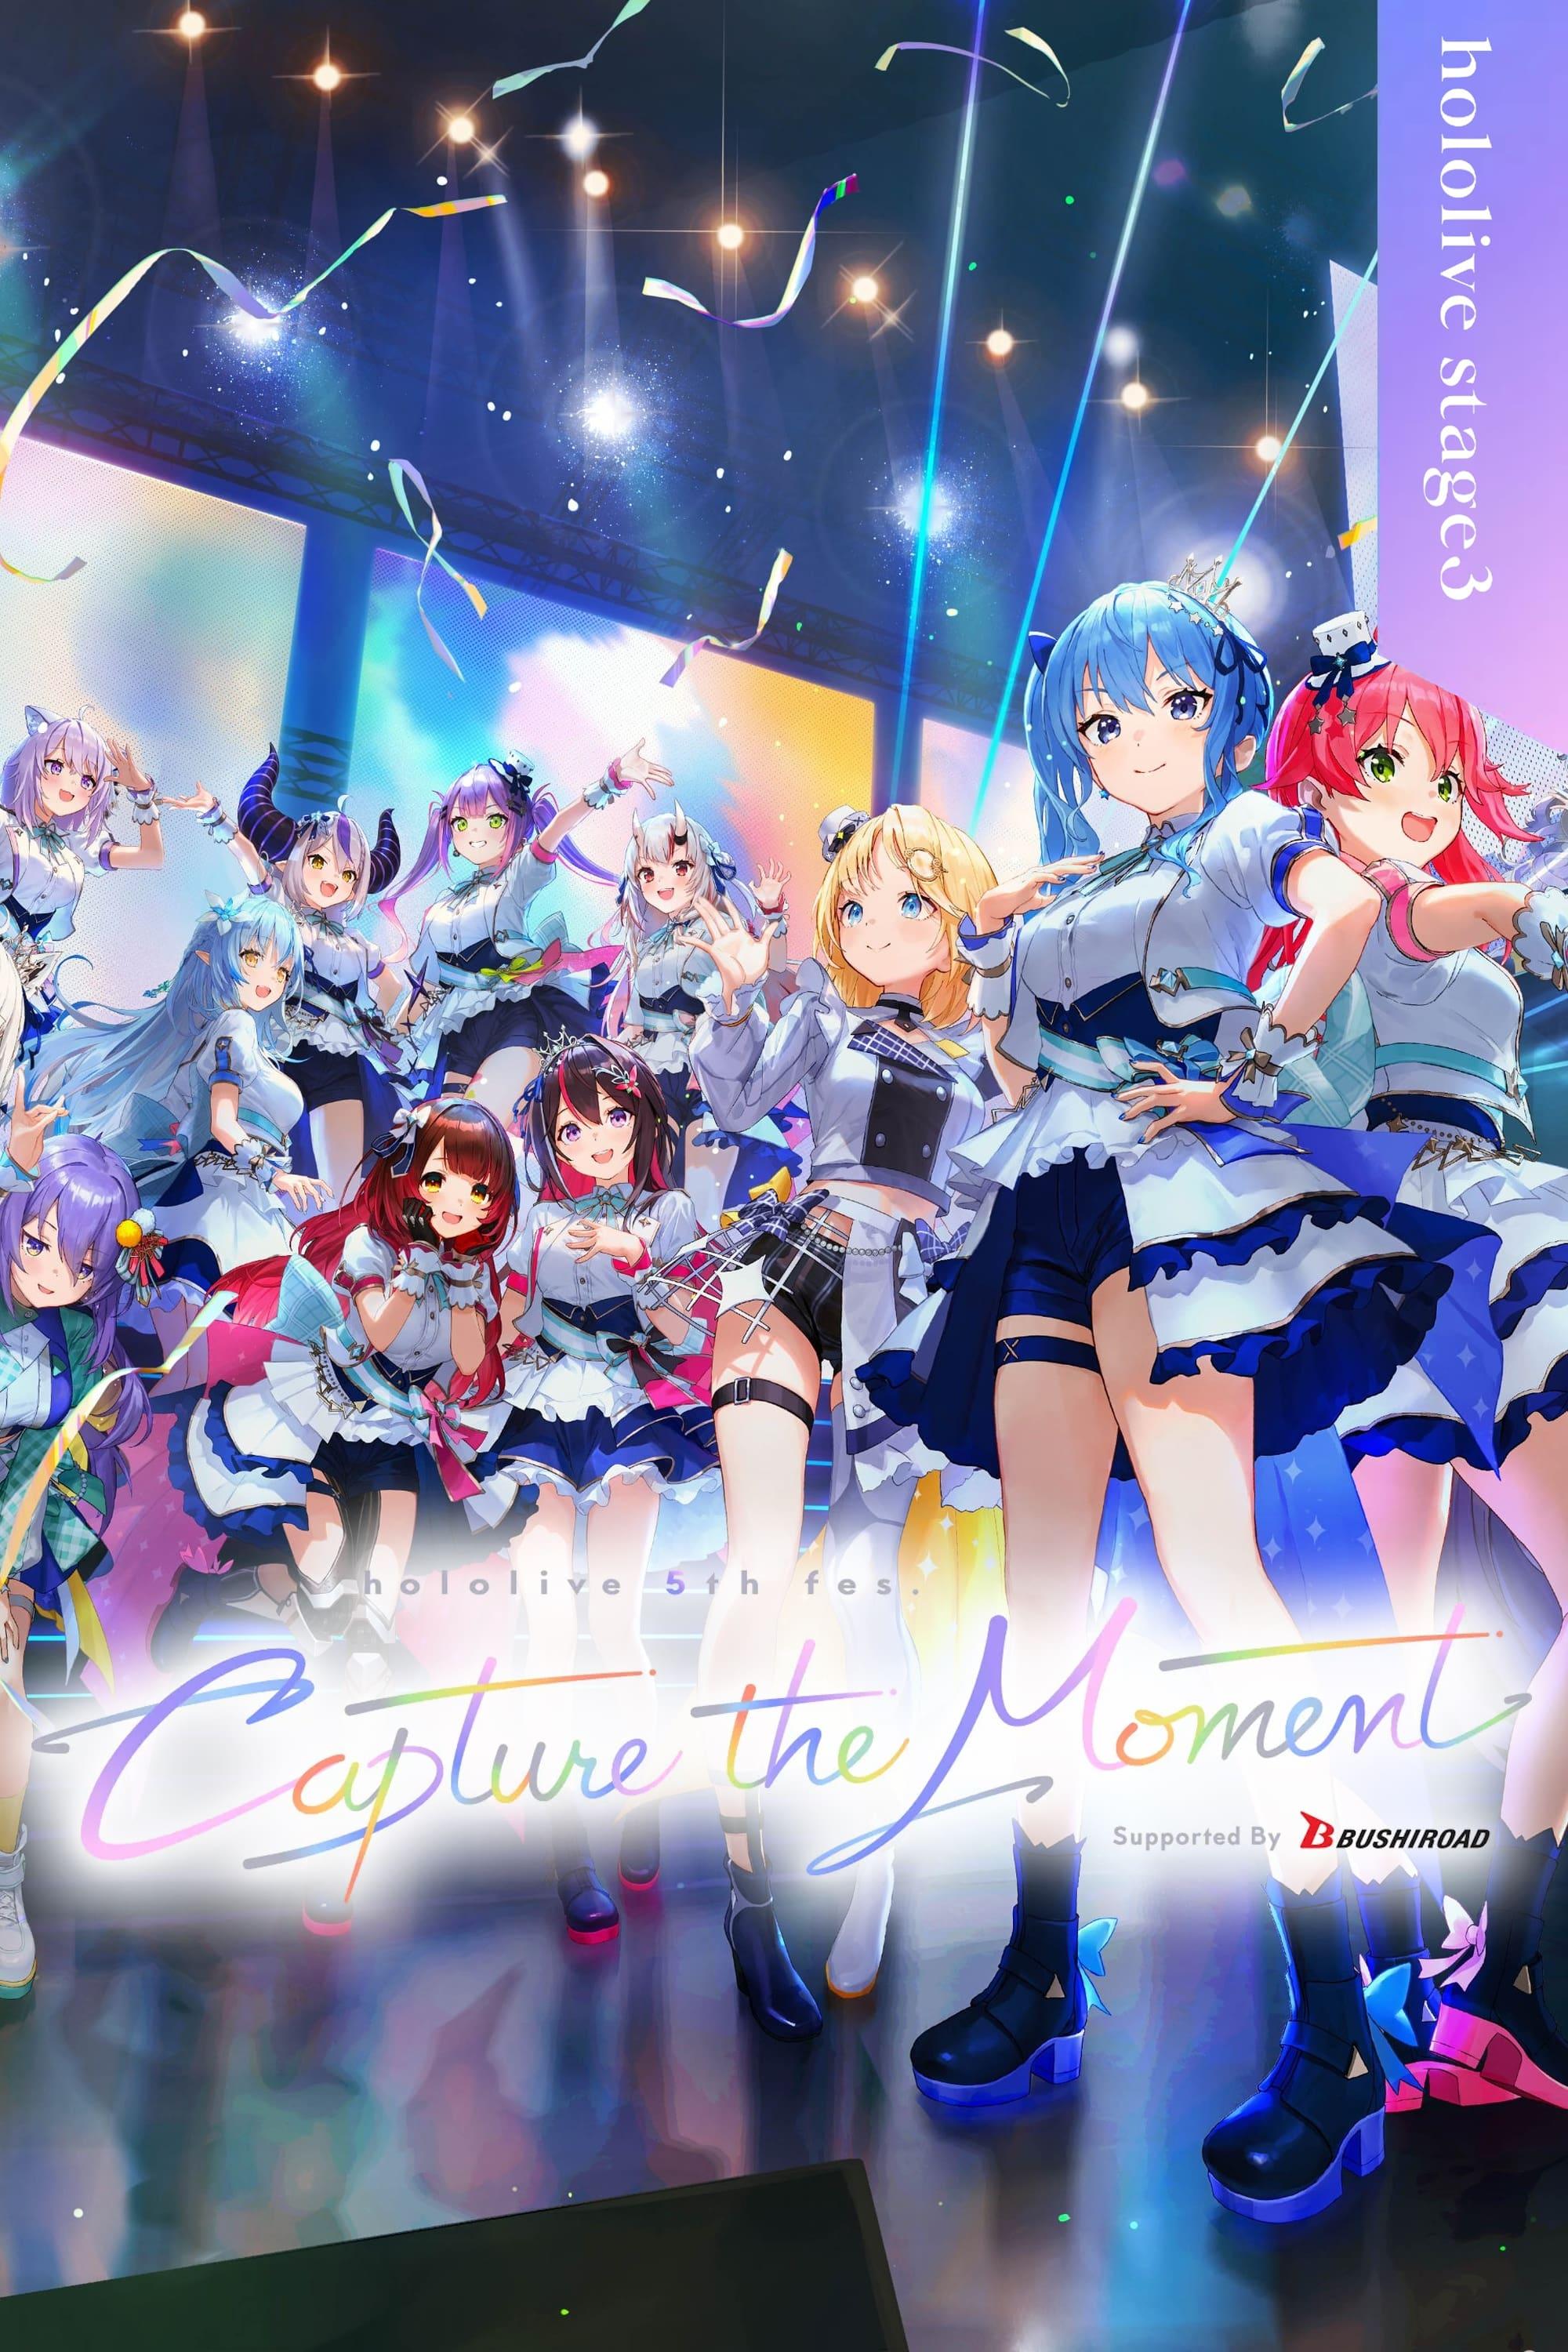 Hololive 5th fes. Capture the Moment Day 2 Stage 3 poster